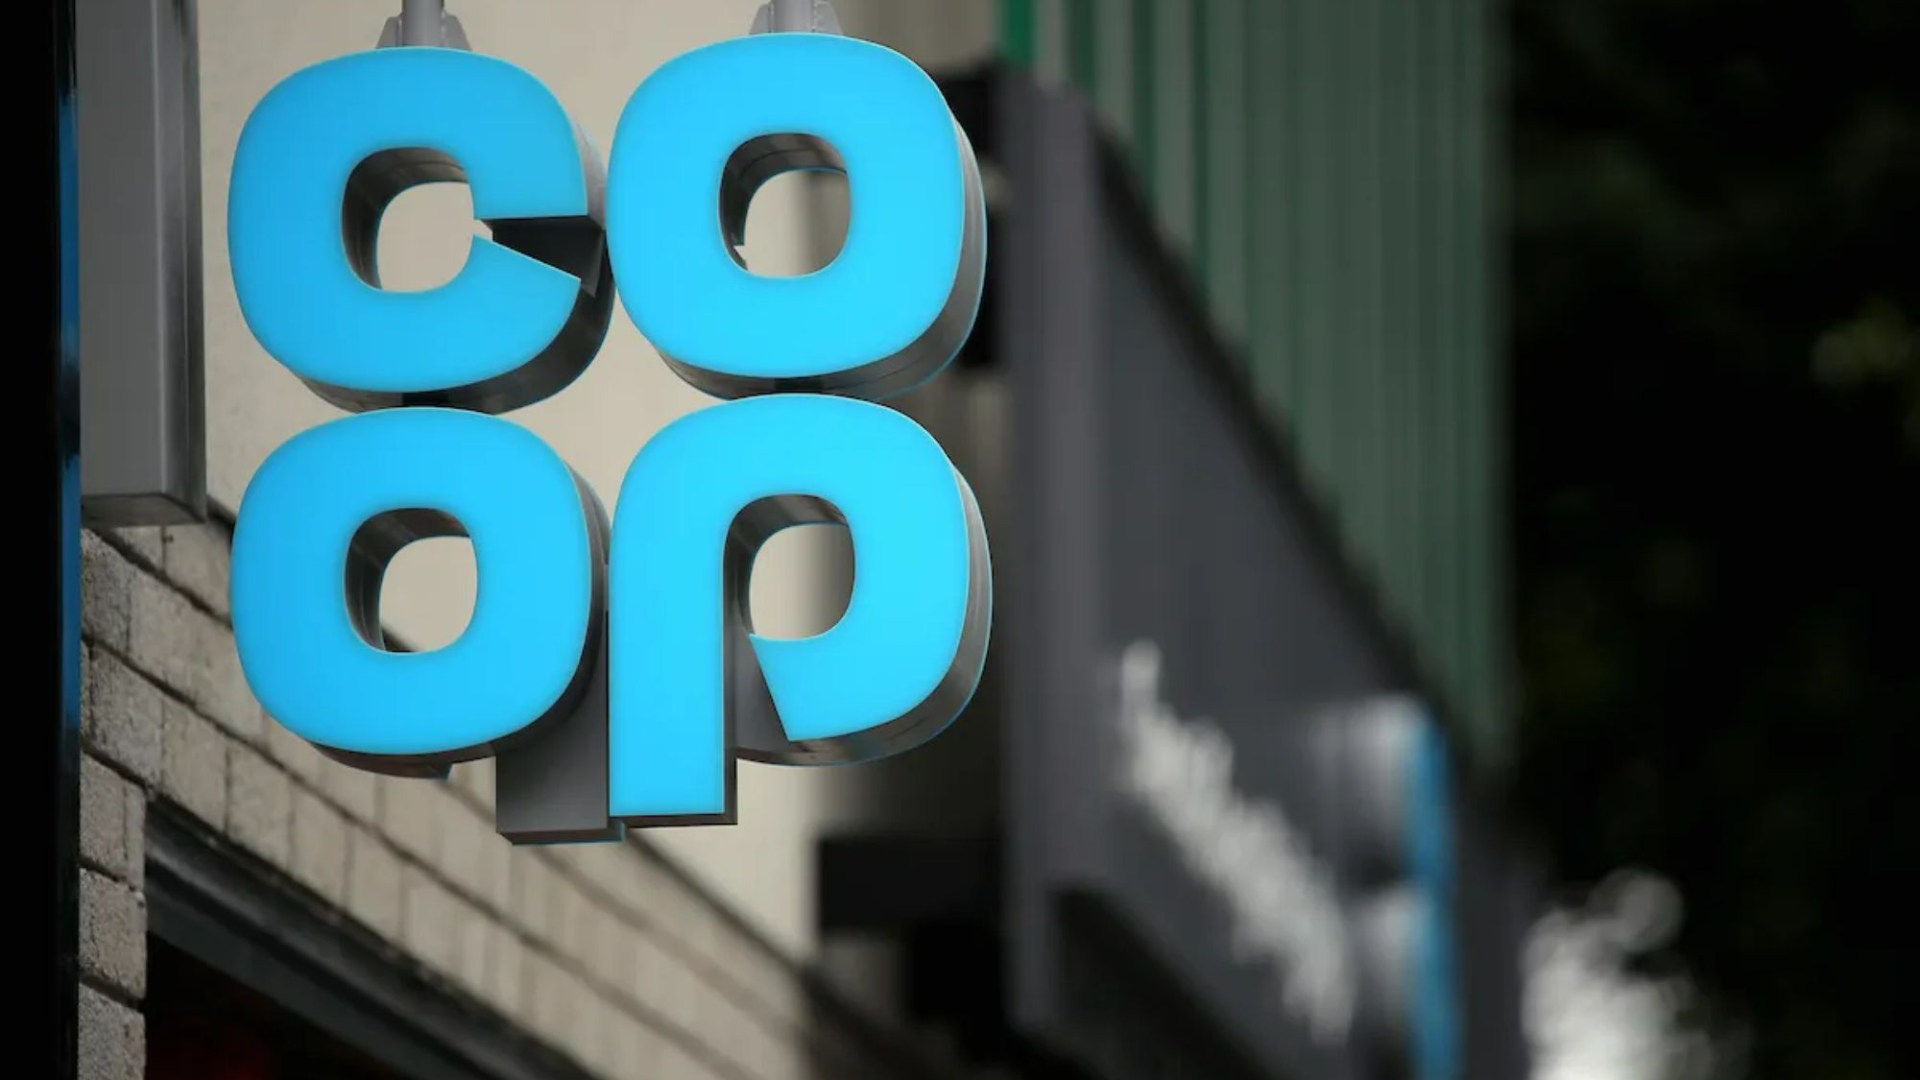 Co-op to make major change to 100 shops this year as supermarket chain ramps up innovative partnership [Video]